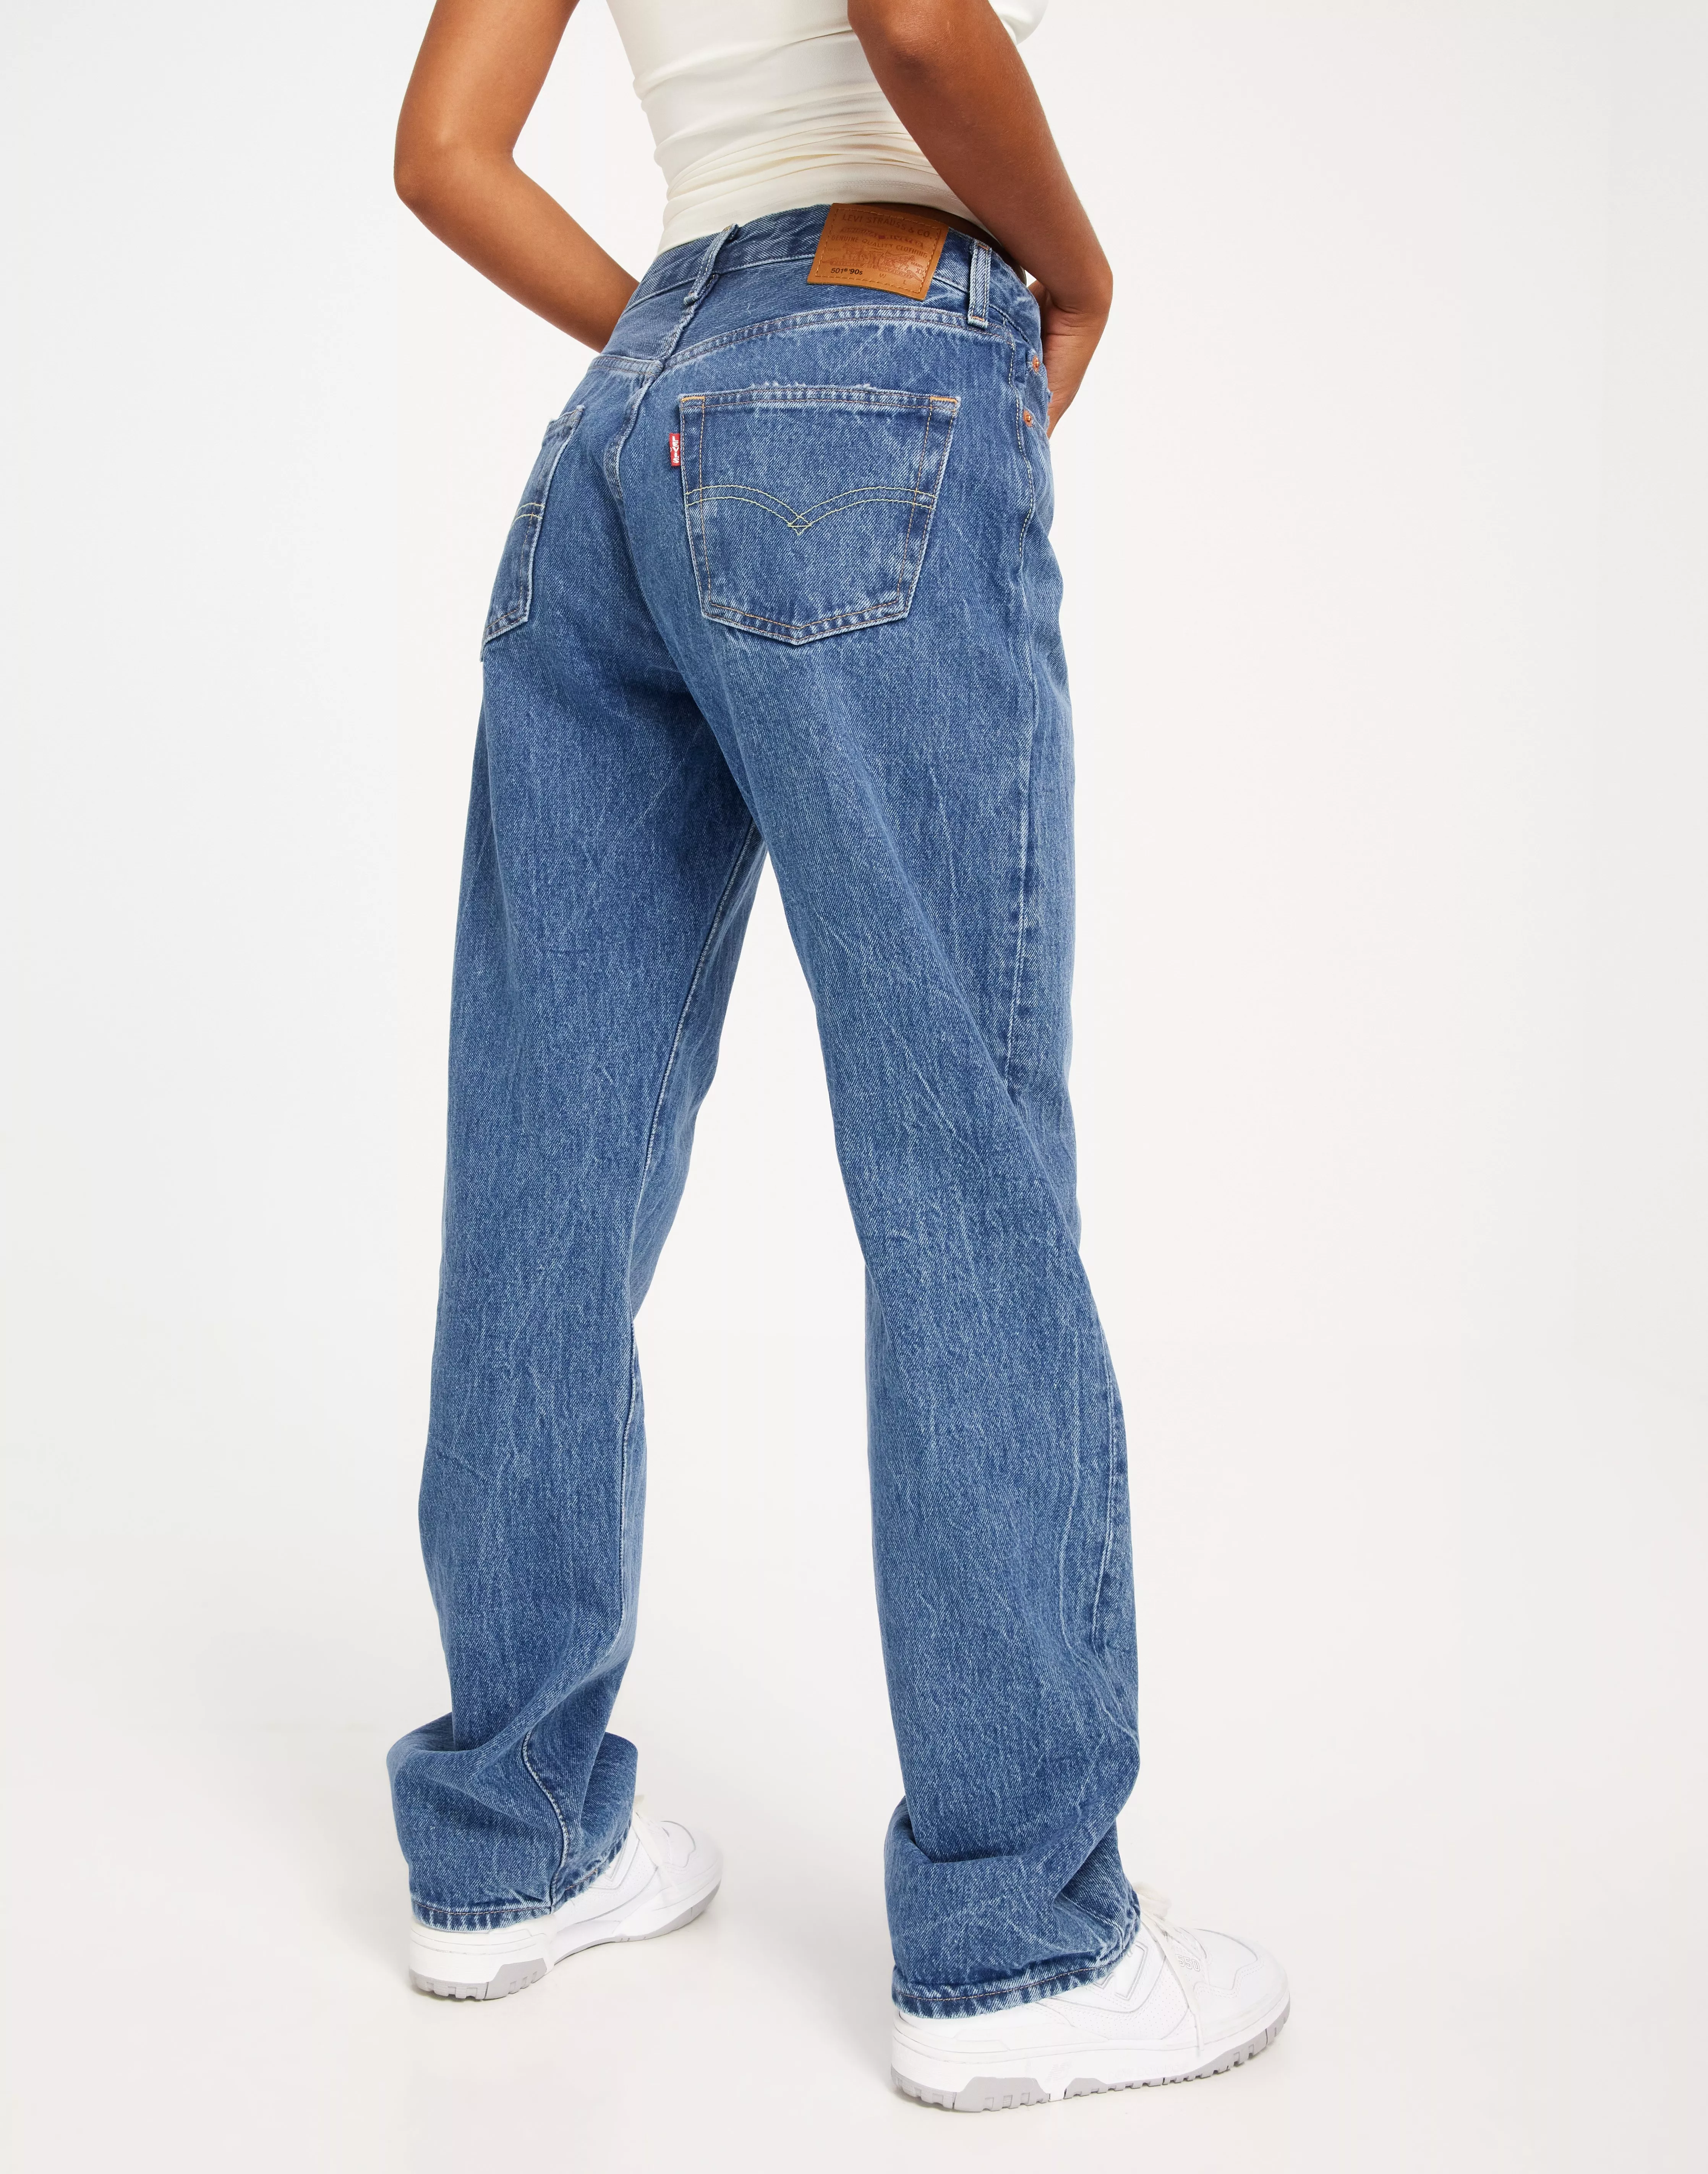 Levi's Newest 501s Pay Tribute to How Jeans Looked Nearly 90 Years